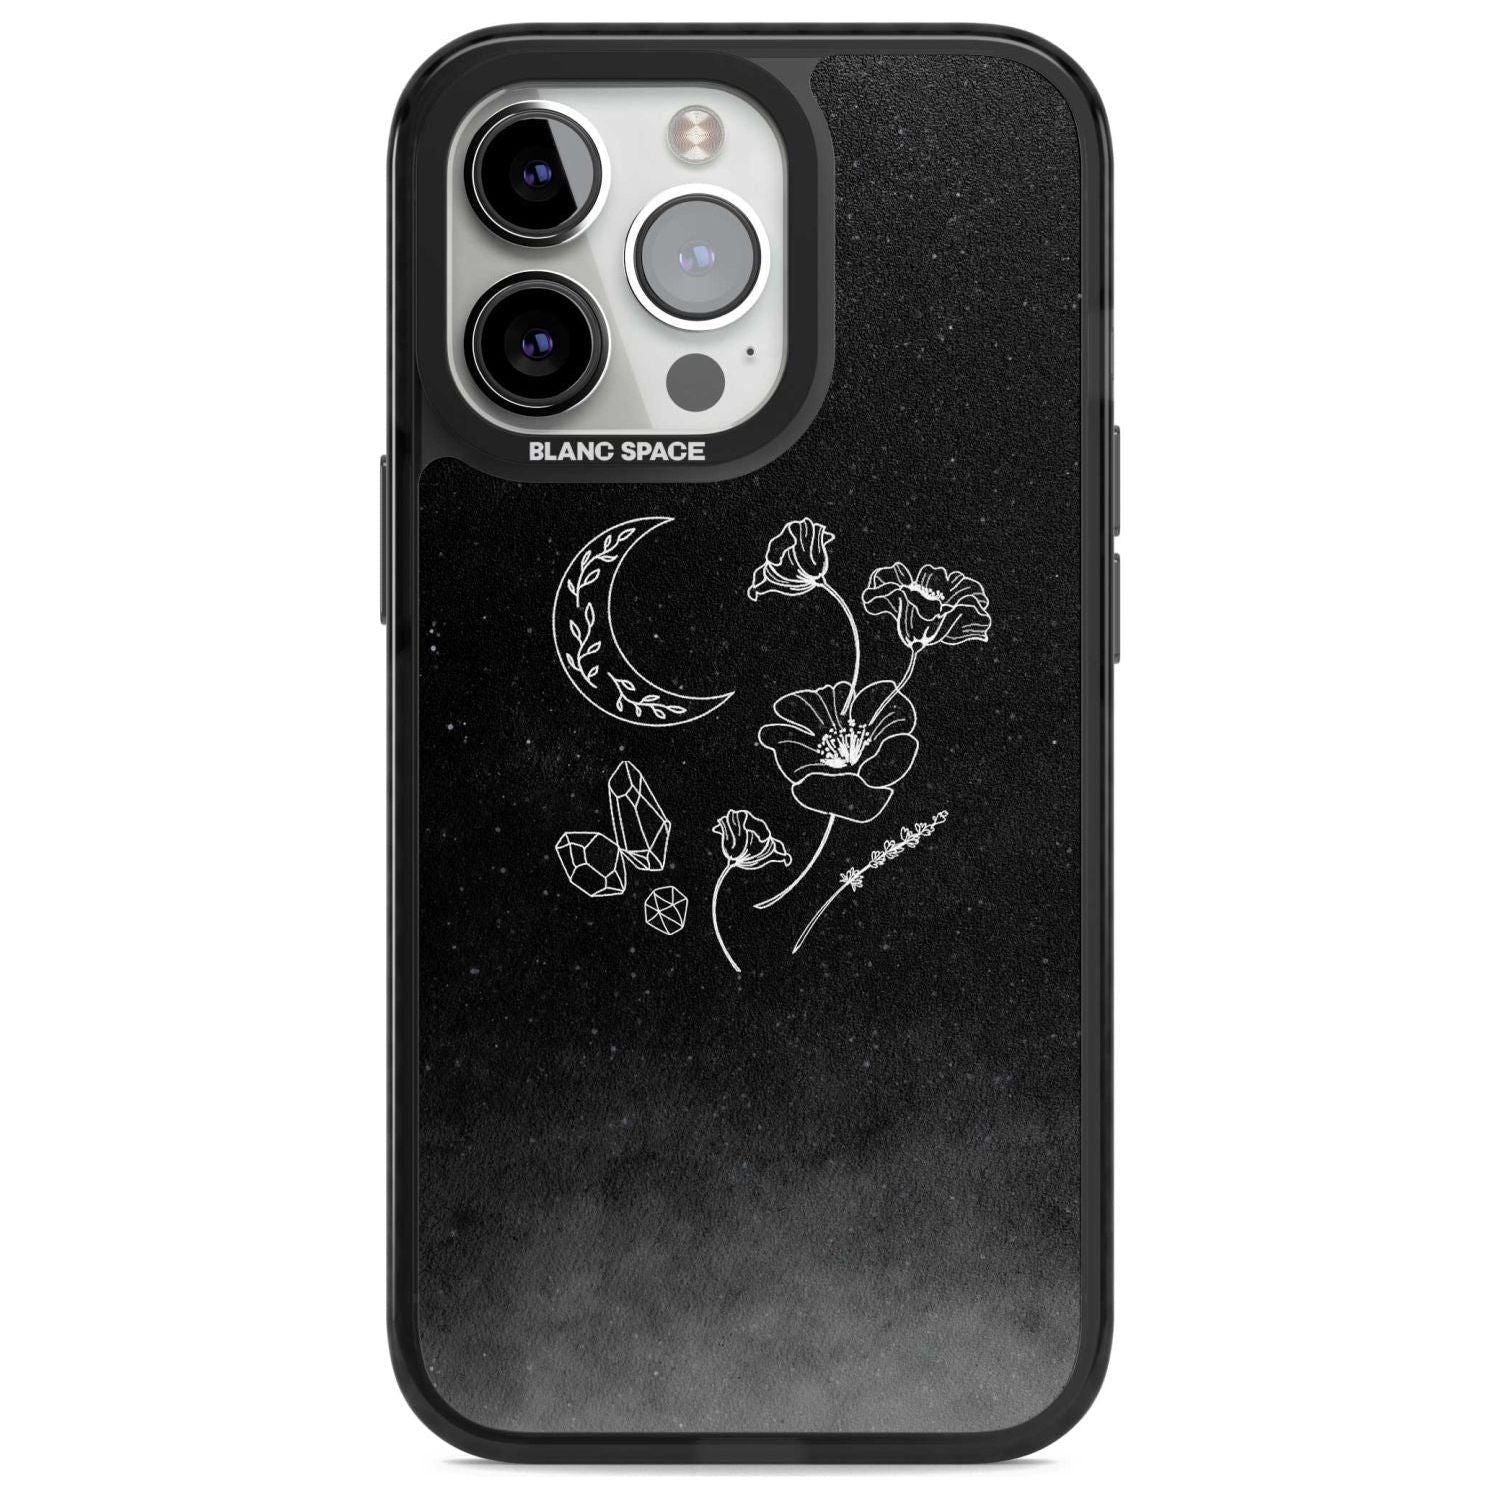 Crescent Moon Collection Phone Case iPhone 15 Pro Max / Magsafe Black Impact Case,iPhone 15 Pro / Magsafe Black Impact Case,iPhone 14 Pro Max / Magsafe Black Impact Case,iPhone 14 Pro / Magsafe Black Impact Case,iPhone 13 Pro / Magsafe Black Impact Case Blanc Space